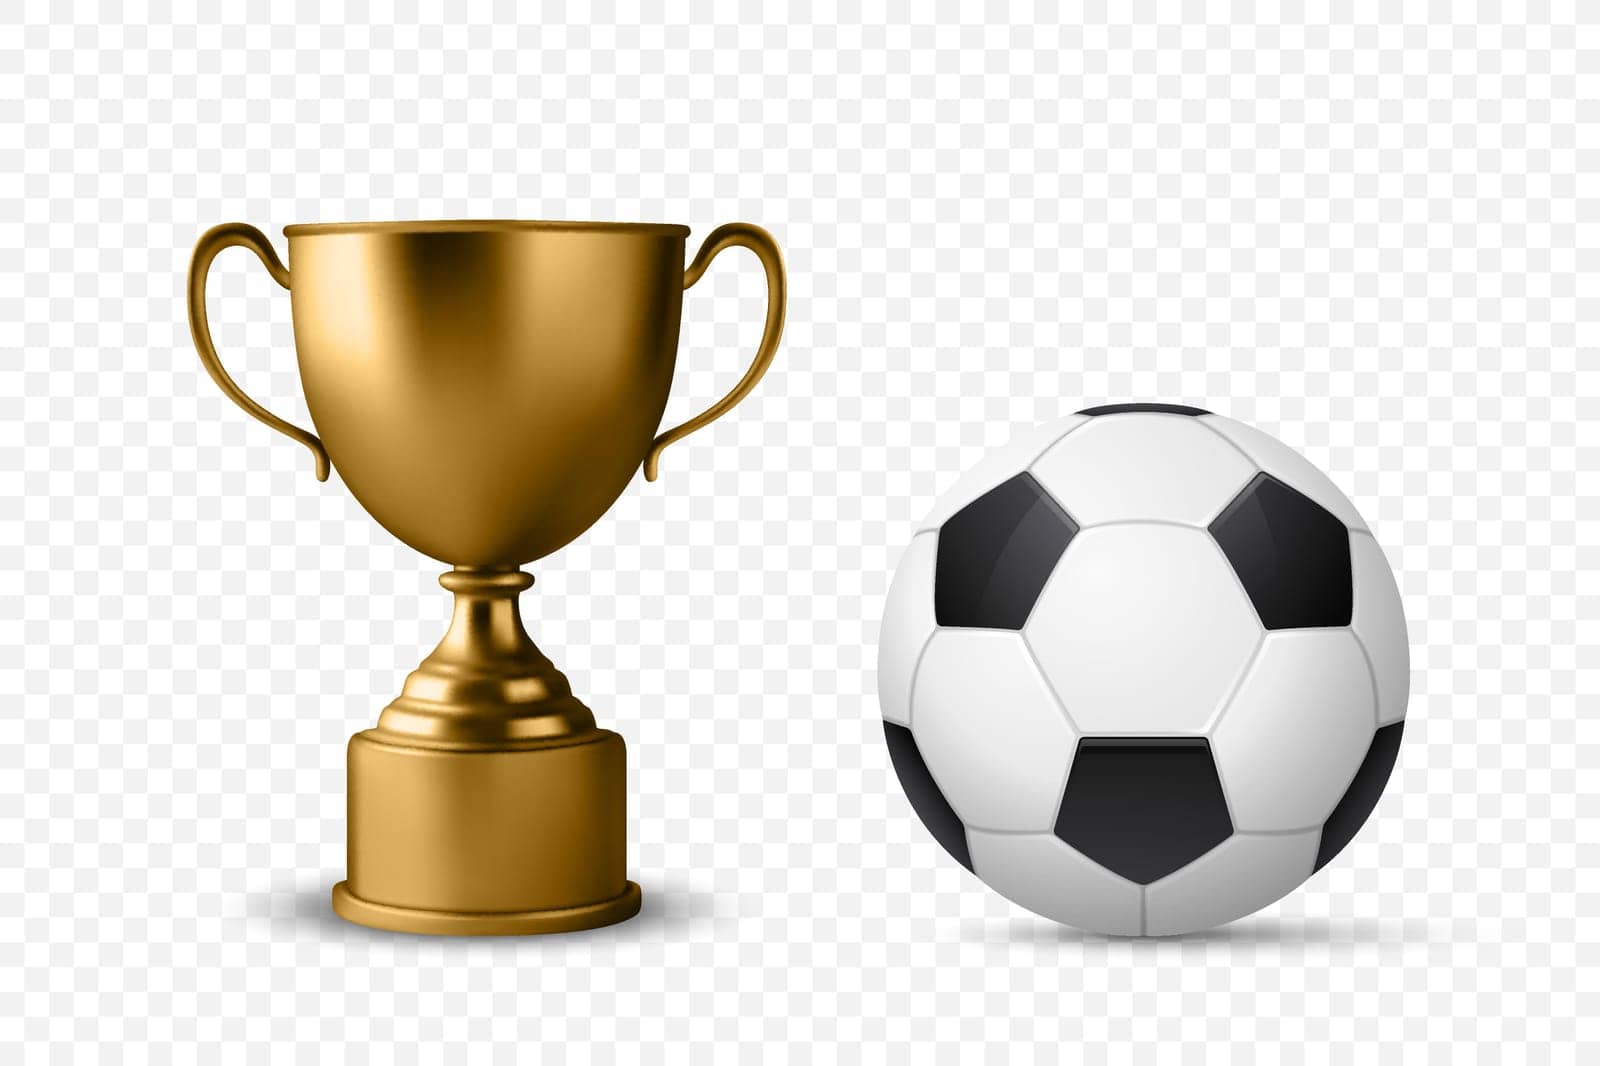 Realistic Vector 3d Blank Golden Champion Cup Icon with Soccer Ball Set Closeup Isolated. Design Template of Championship Trophy. Sports Awards and Victory Celebrations Concept.